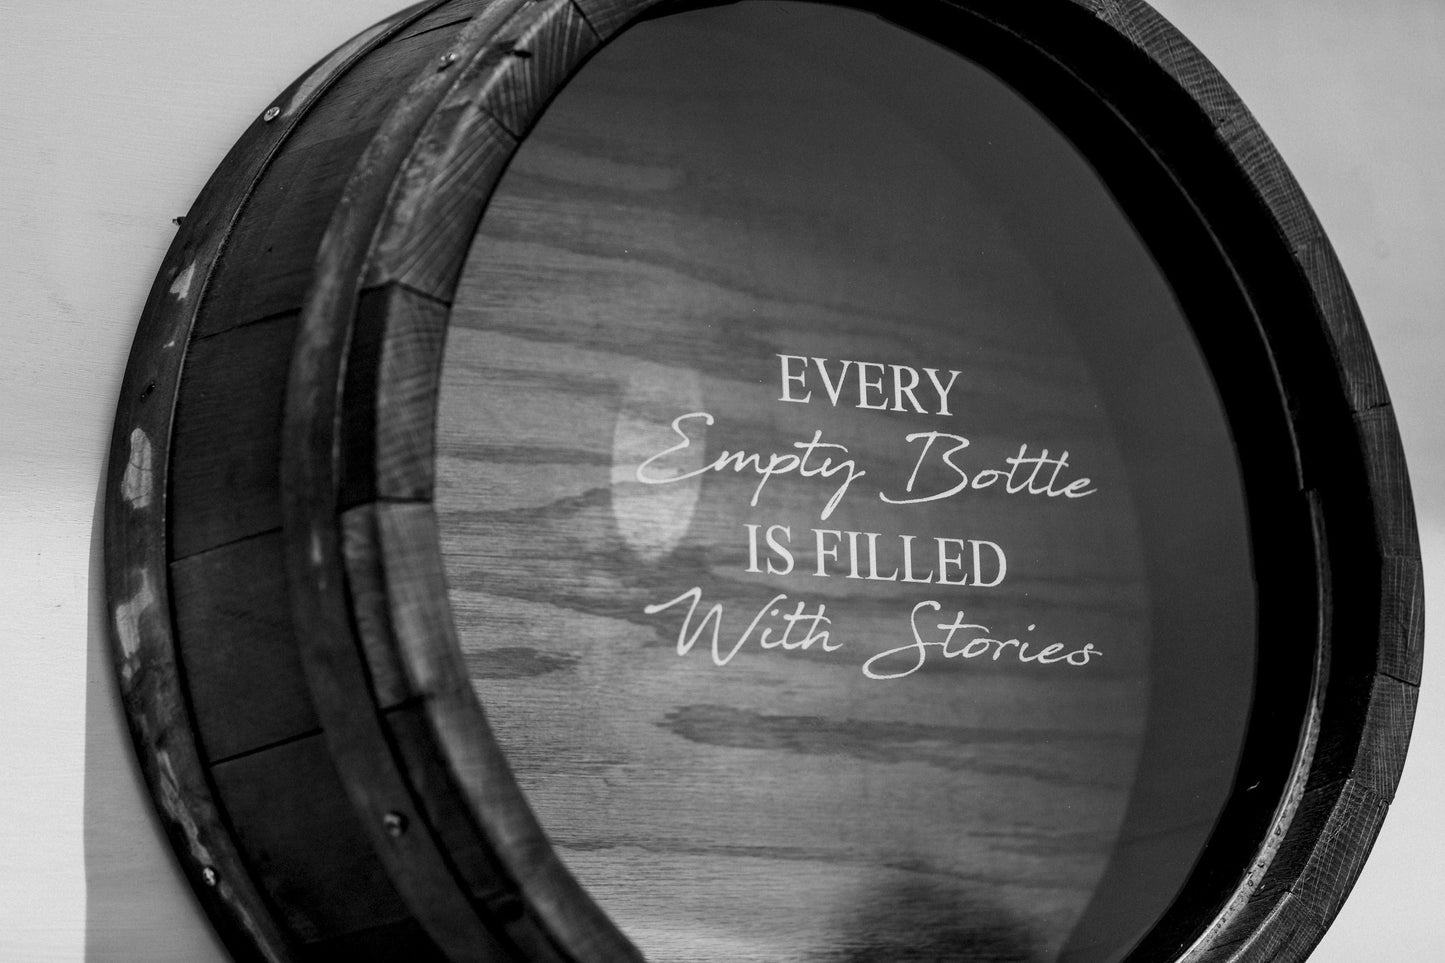 Ebony Finish "Every Empty Bottle is Filled with Stories"